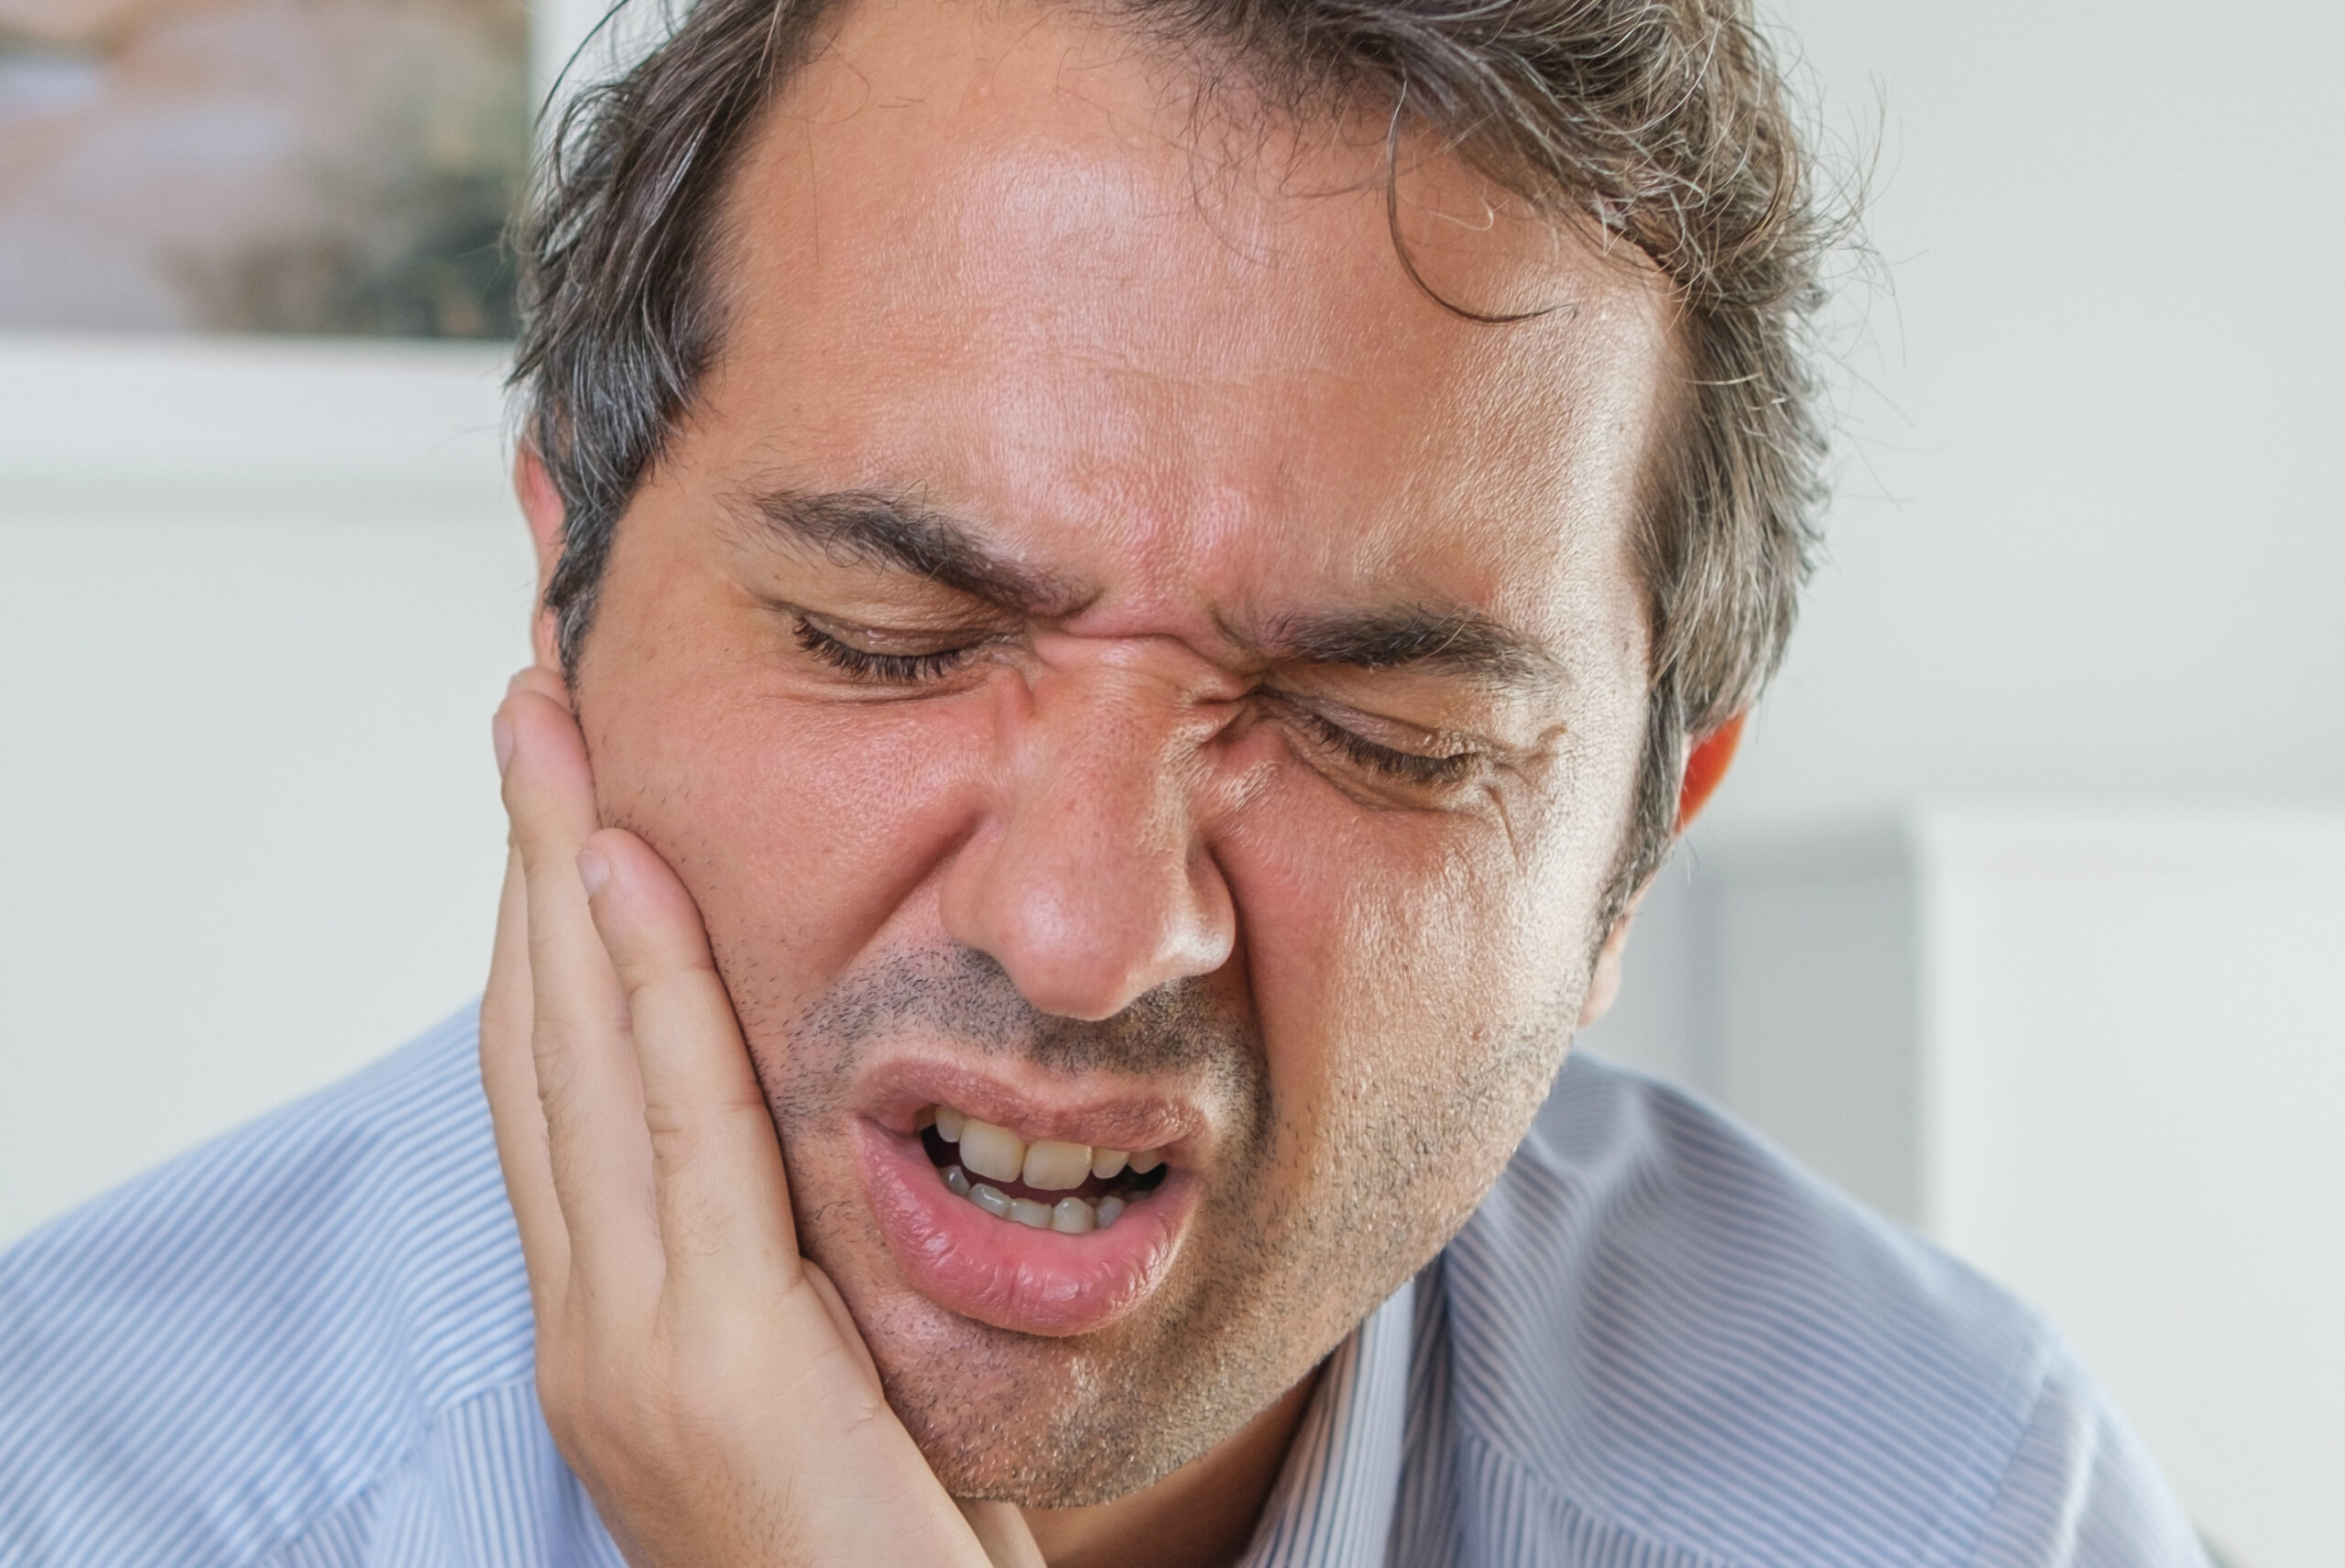 Man suffering toothache sitting at home